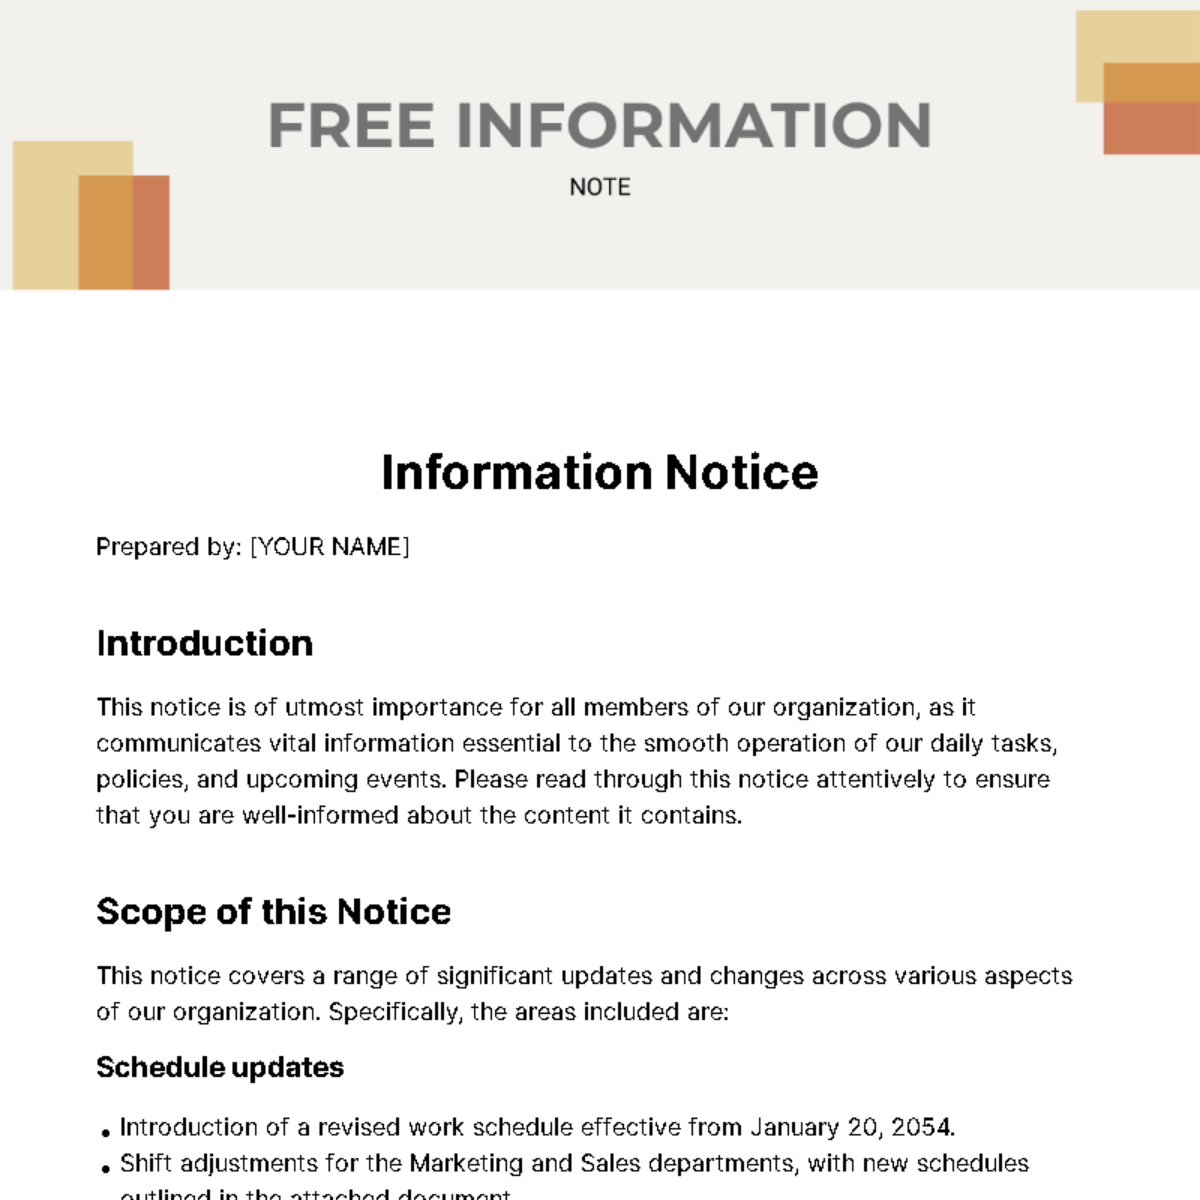 Free Information Note Template